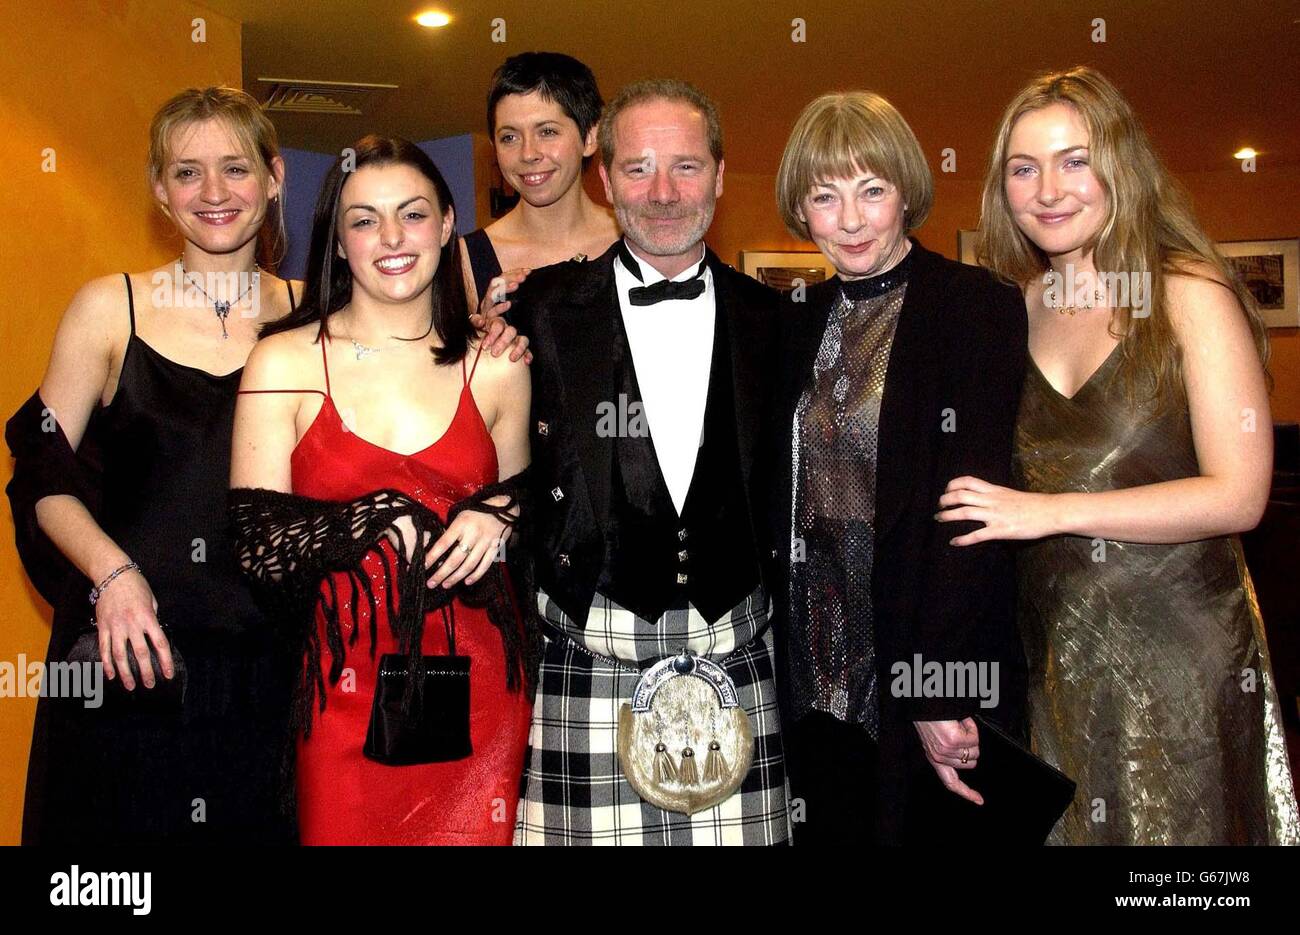 Director Peter Mullan with his leading ladies (L-R Nora Jane Noone, Anne Marie Duff, Eileen Walsh, Geraldine McEwan and Dorothy Duff at the UK Premiere of his movie 'The Magdalene Sisters' at UGC Glasgow. * The film which has received multiple Bafta nominations, is based on the true accounts of the Magdalene laundries in Ireland in 1964. Stock Photo